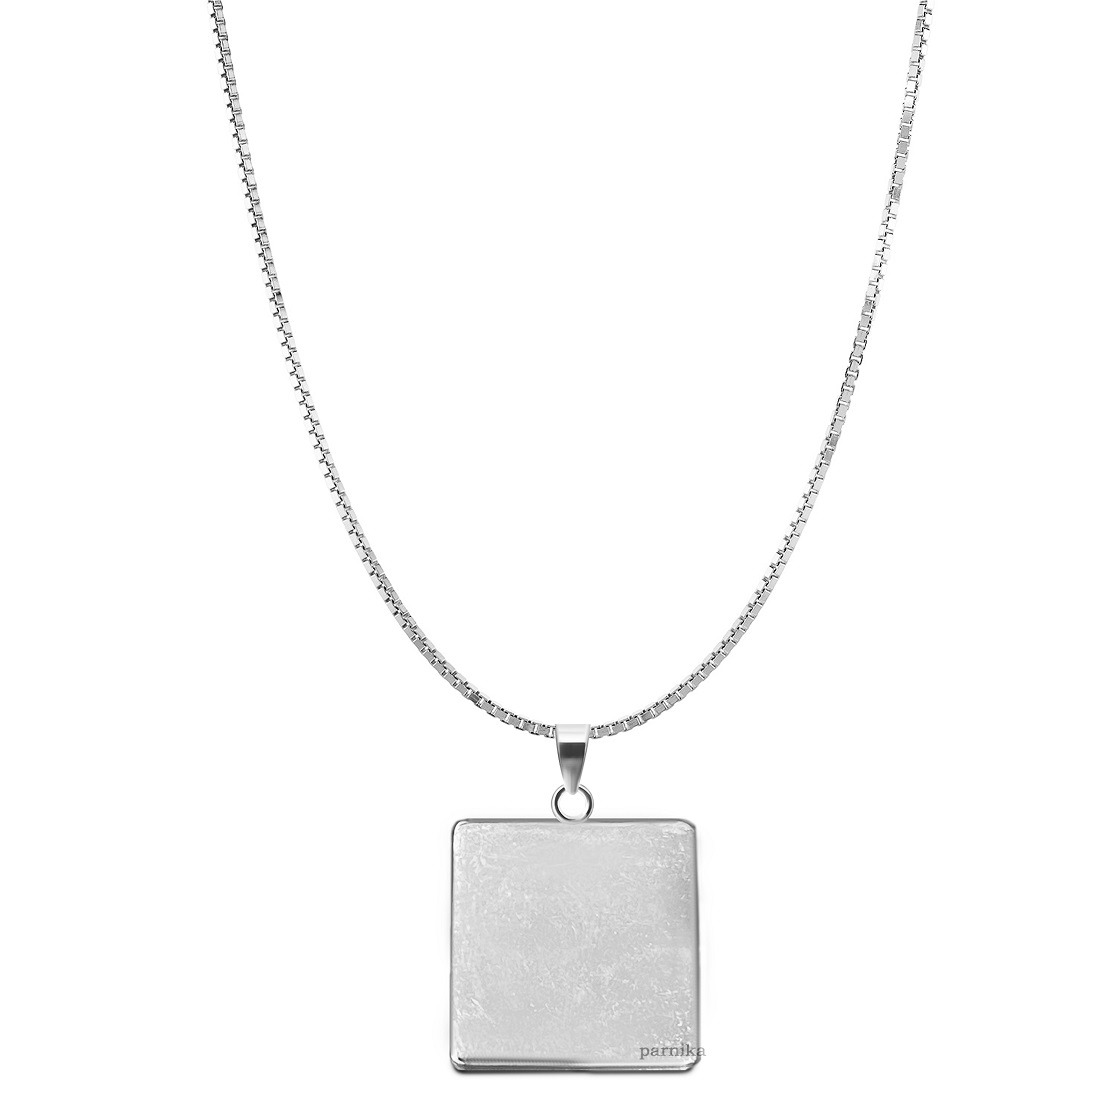 Buy Pendant with Chain Designs Online in India - Lvacreations